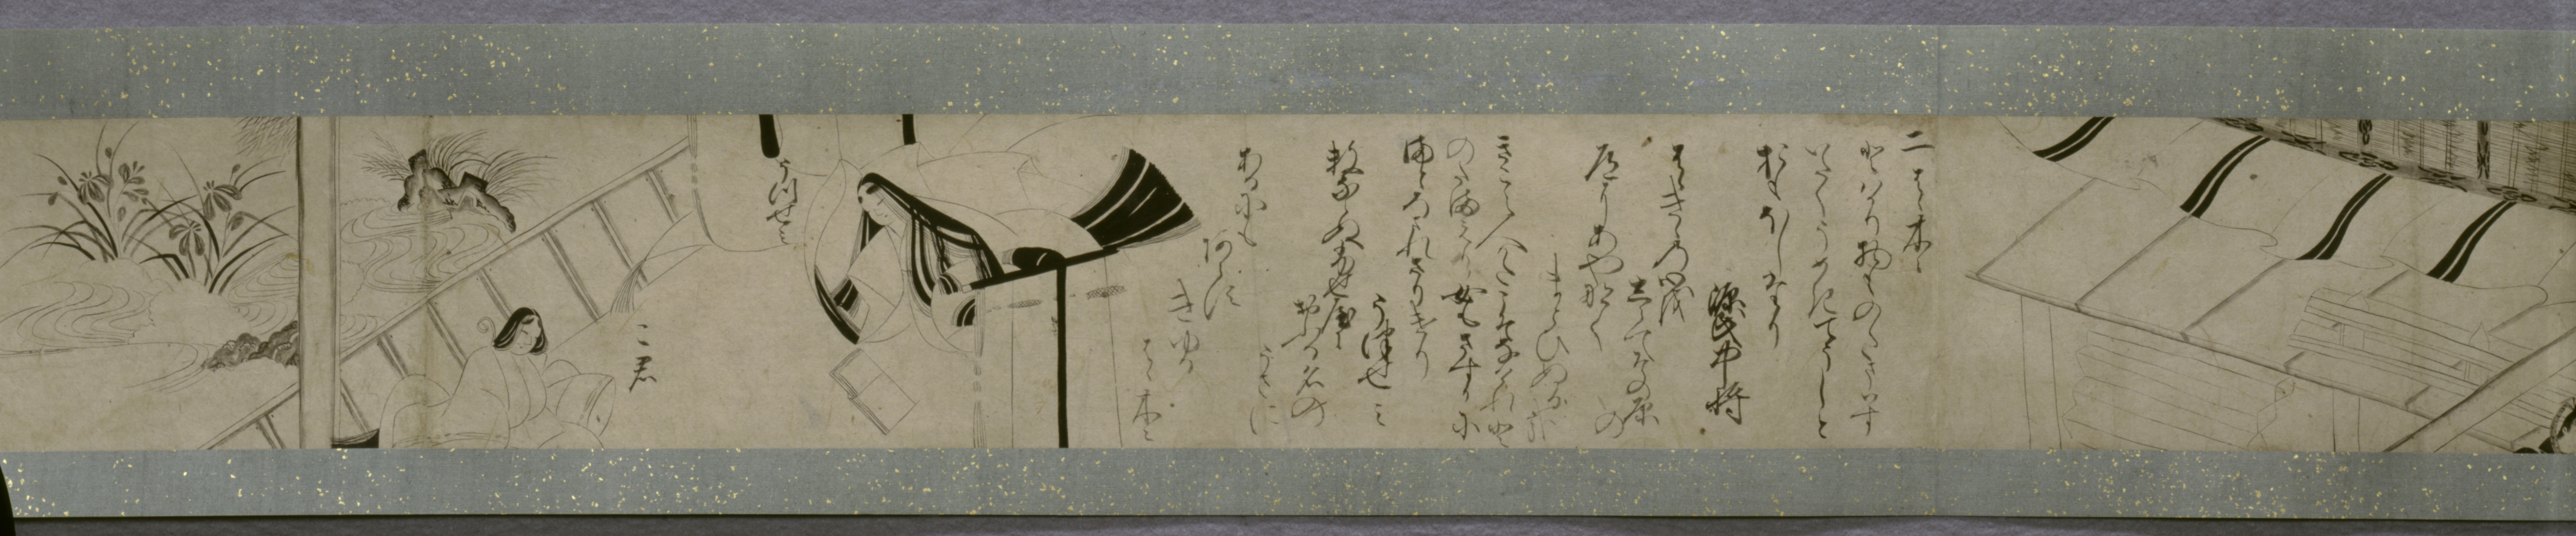 A section of a black and white Genji Monogatari picture scroll